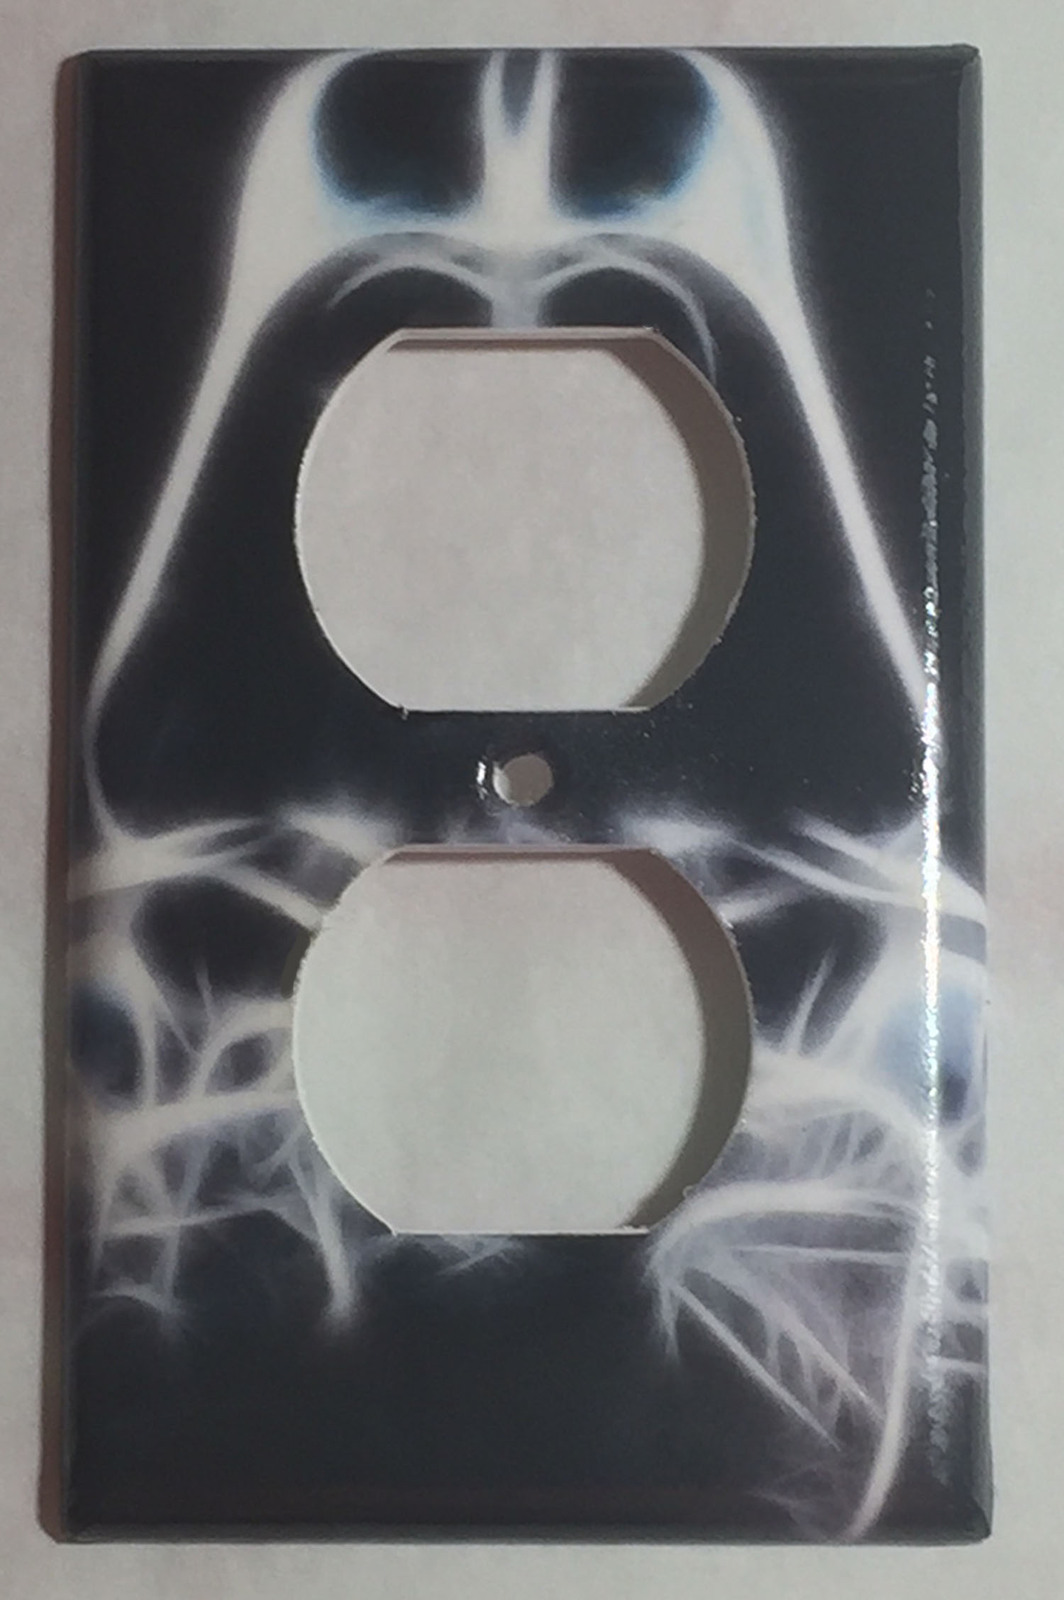 Star Wars Darth Vader Light Switch Power Outlet Wall Cover Plate Home Decor